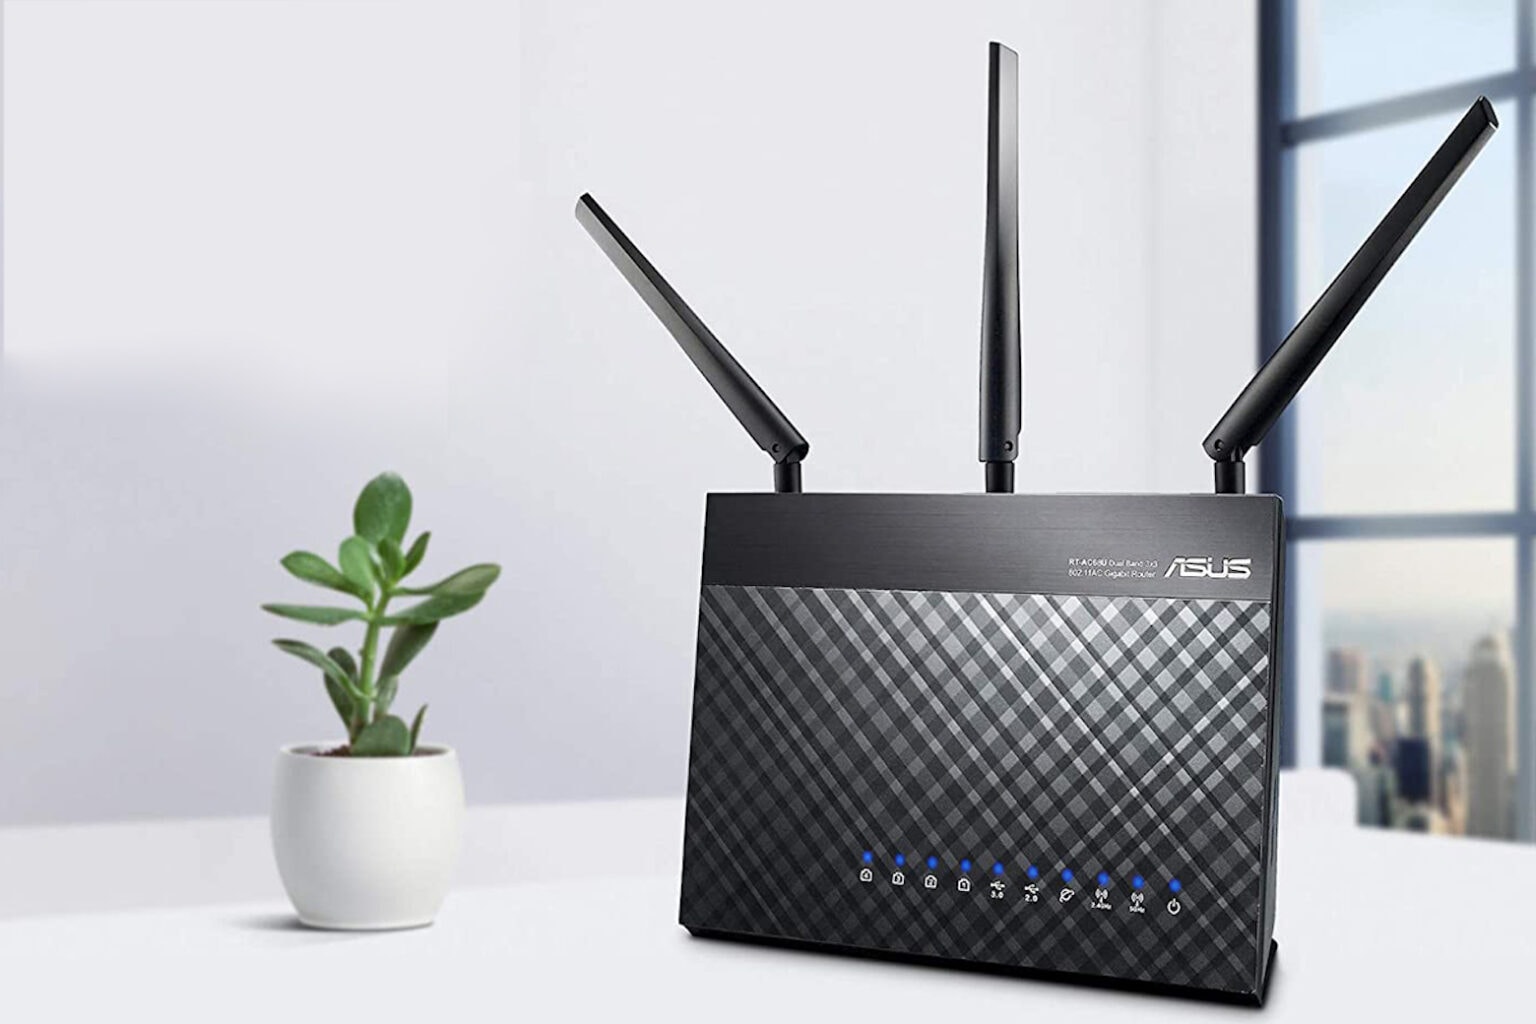 This Asus Wi-FI router racks up amazing reviews on Amazon and across the web.